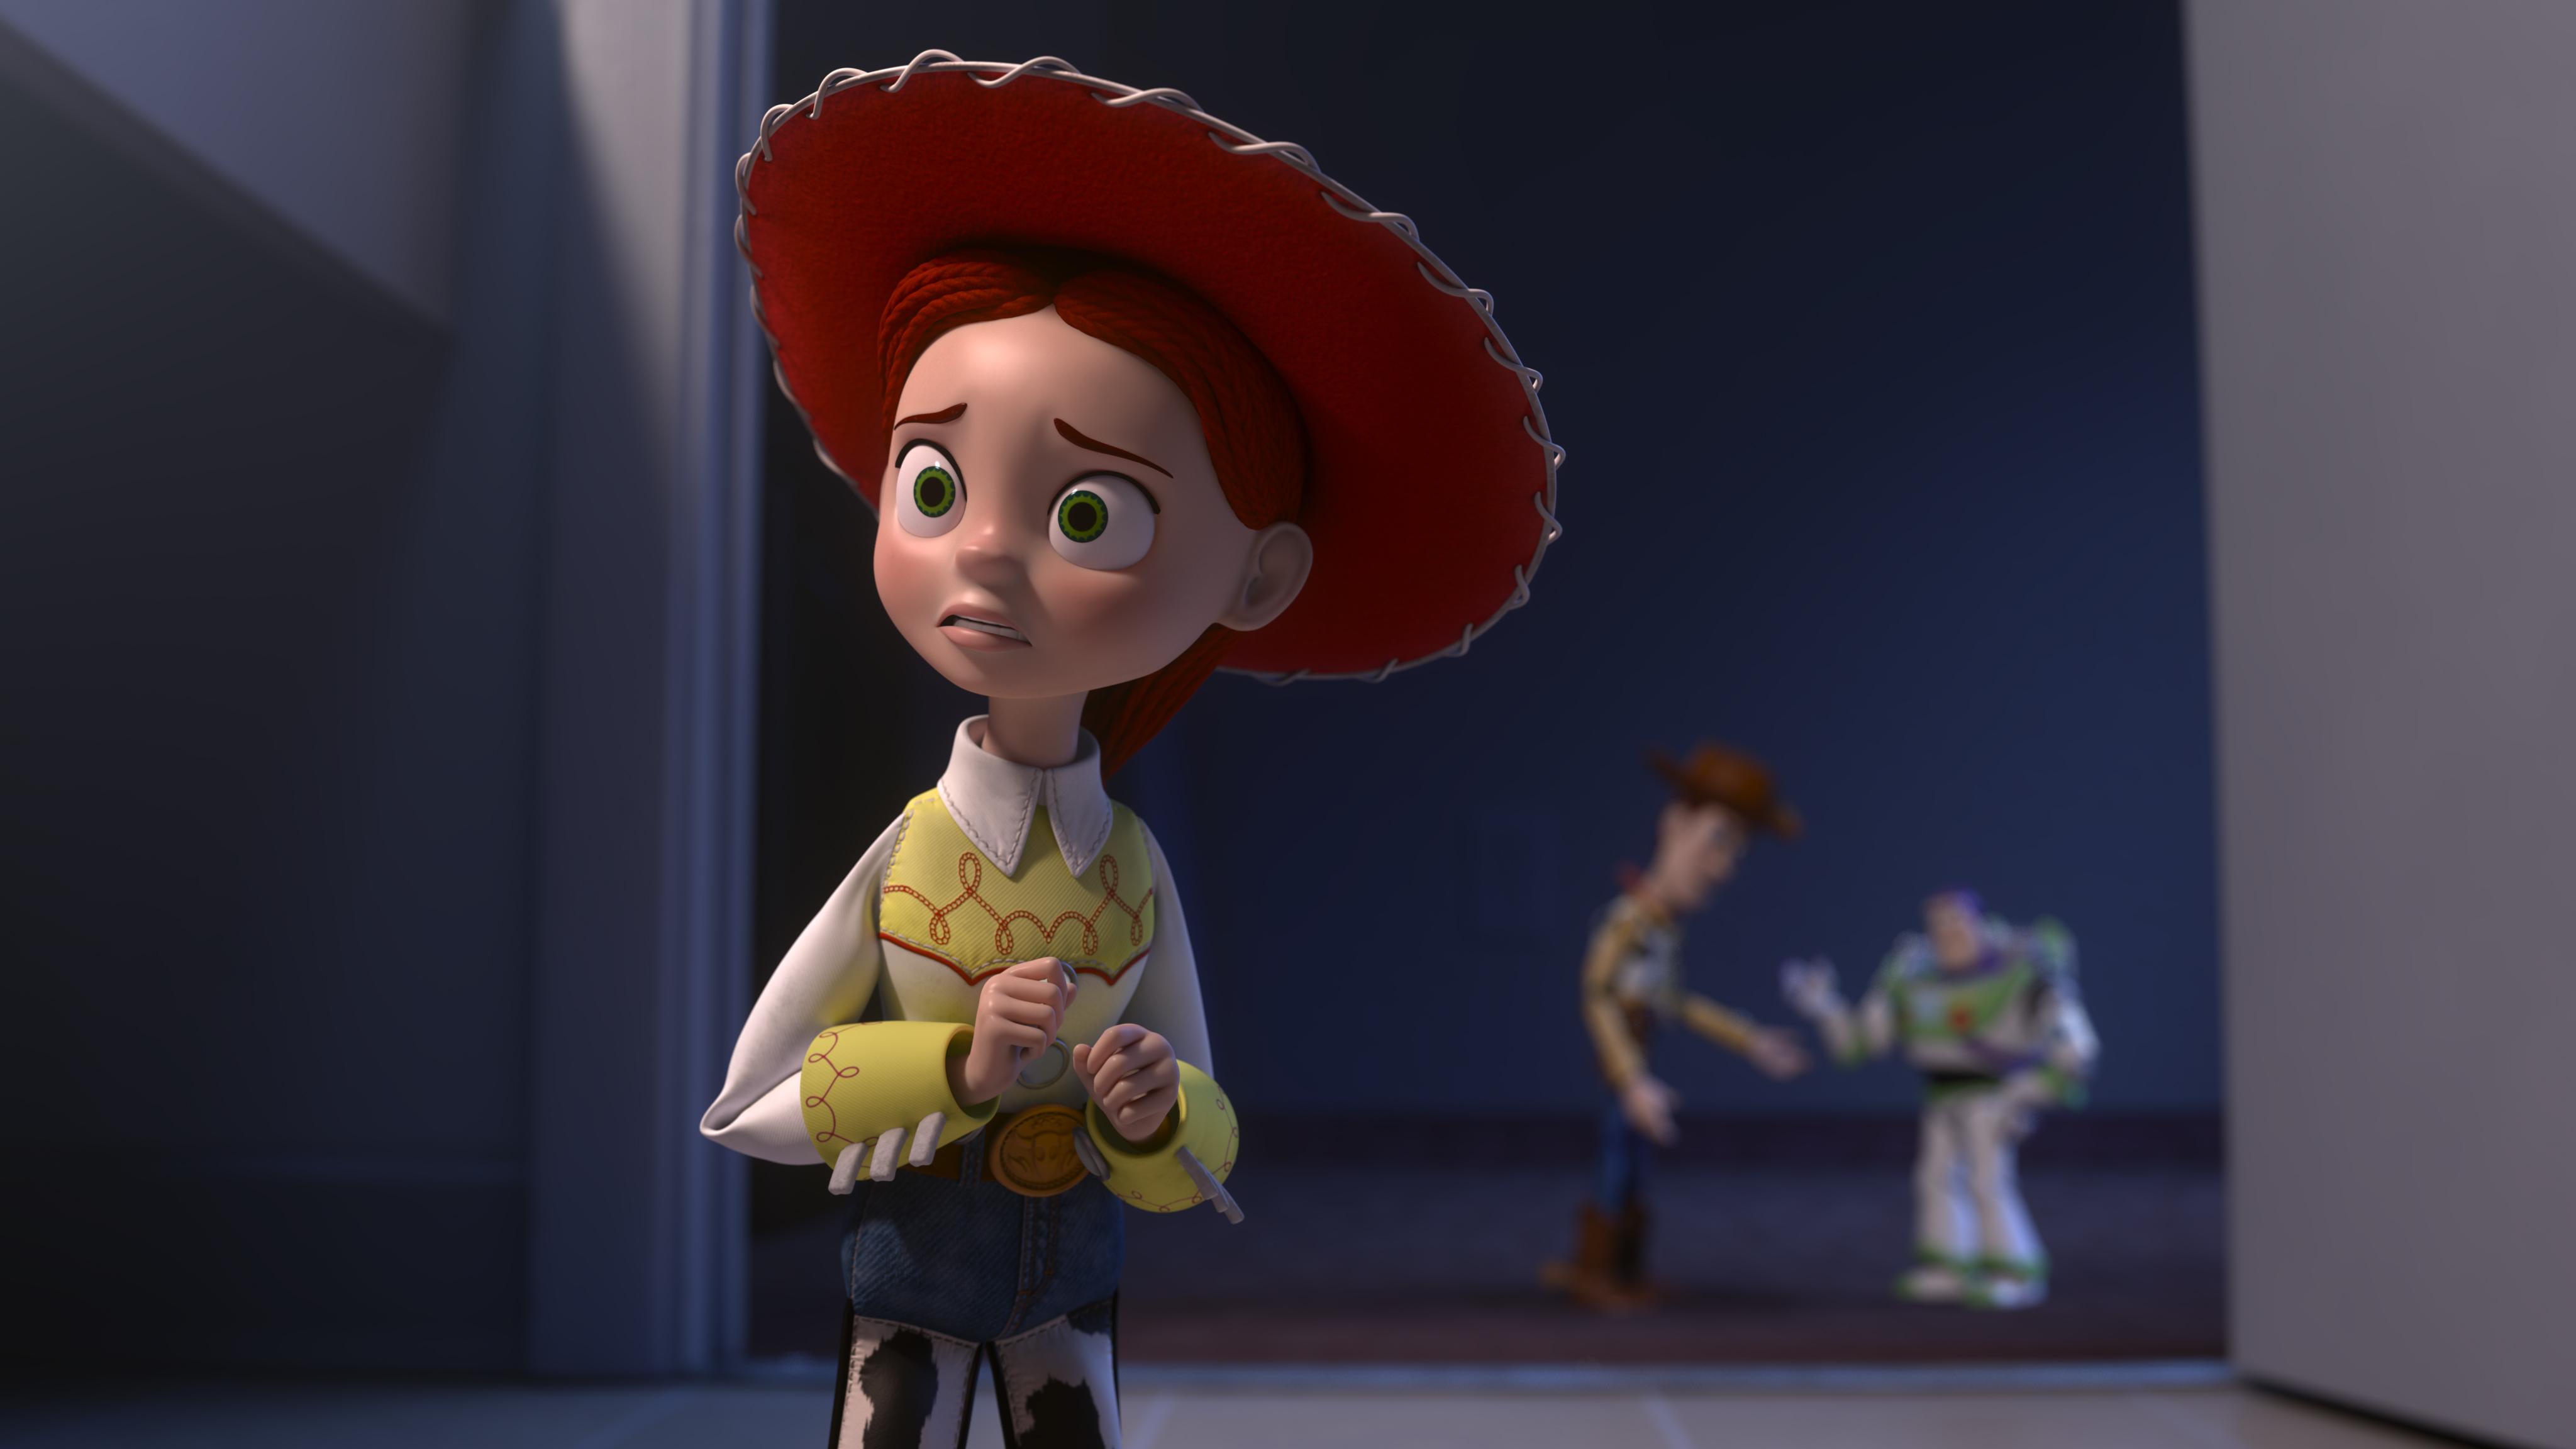 HD Quality Wallpaper | Collection: Movie, 4096x2304 Toy Story Of Terror!